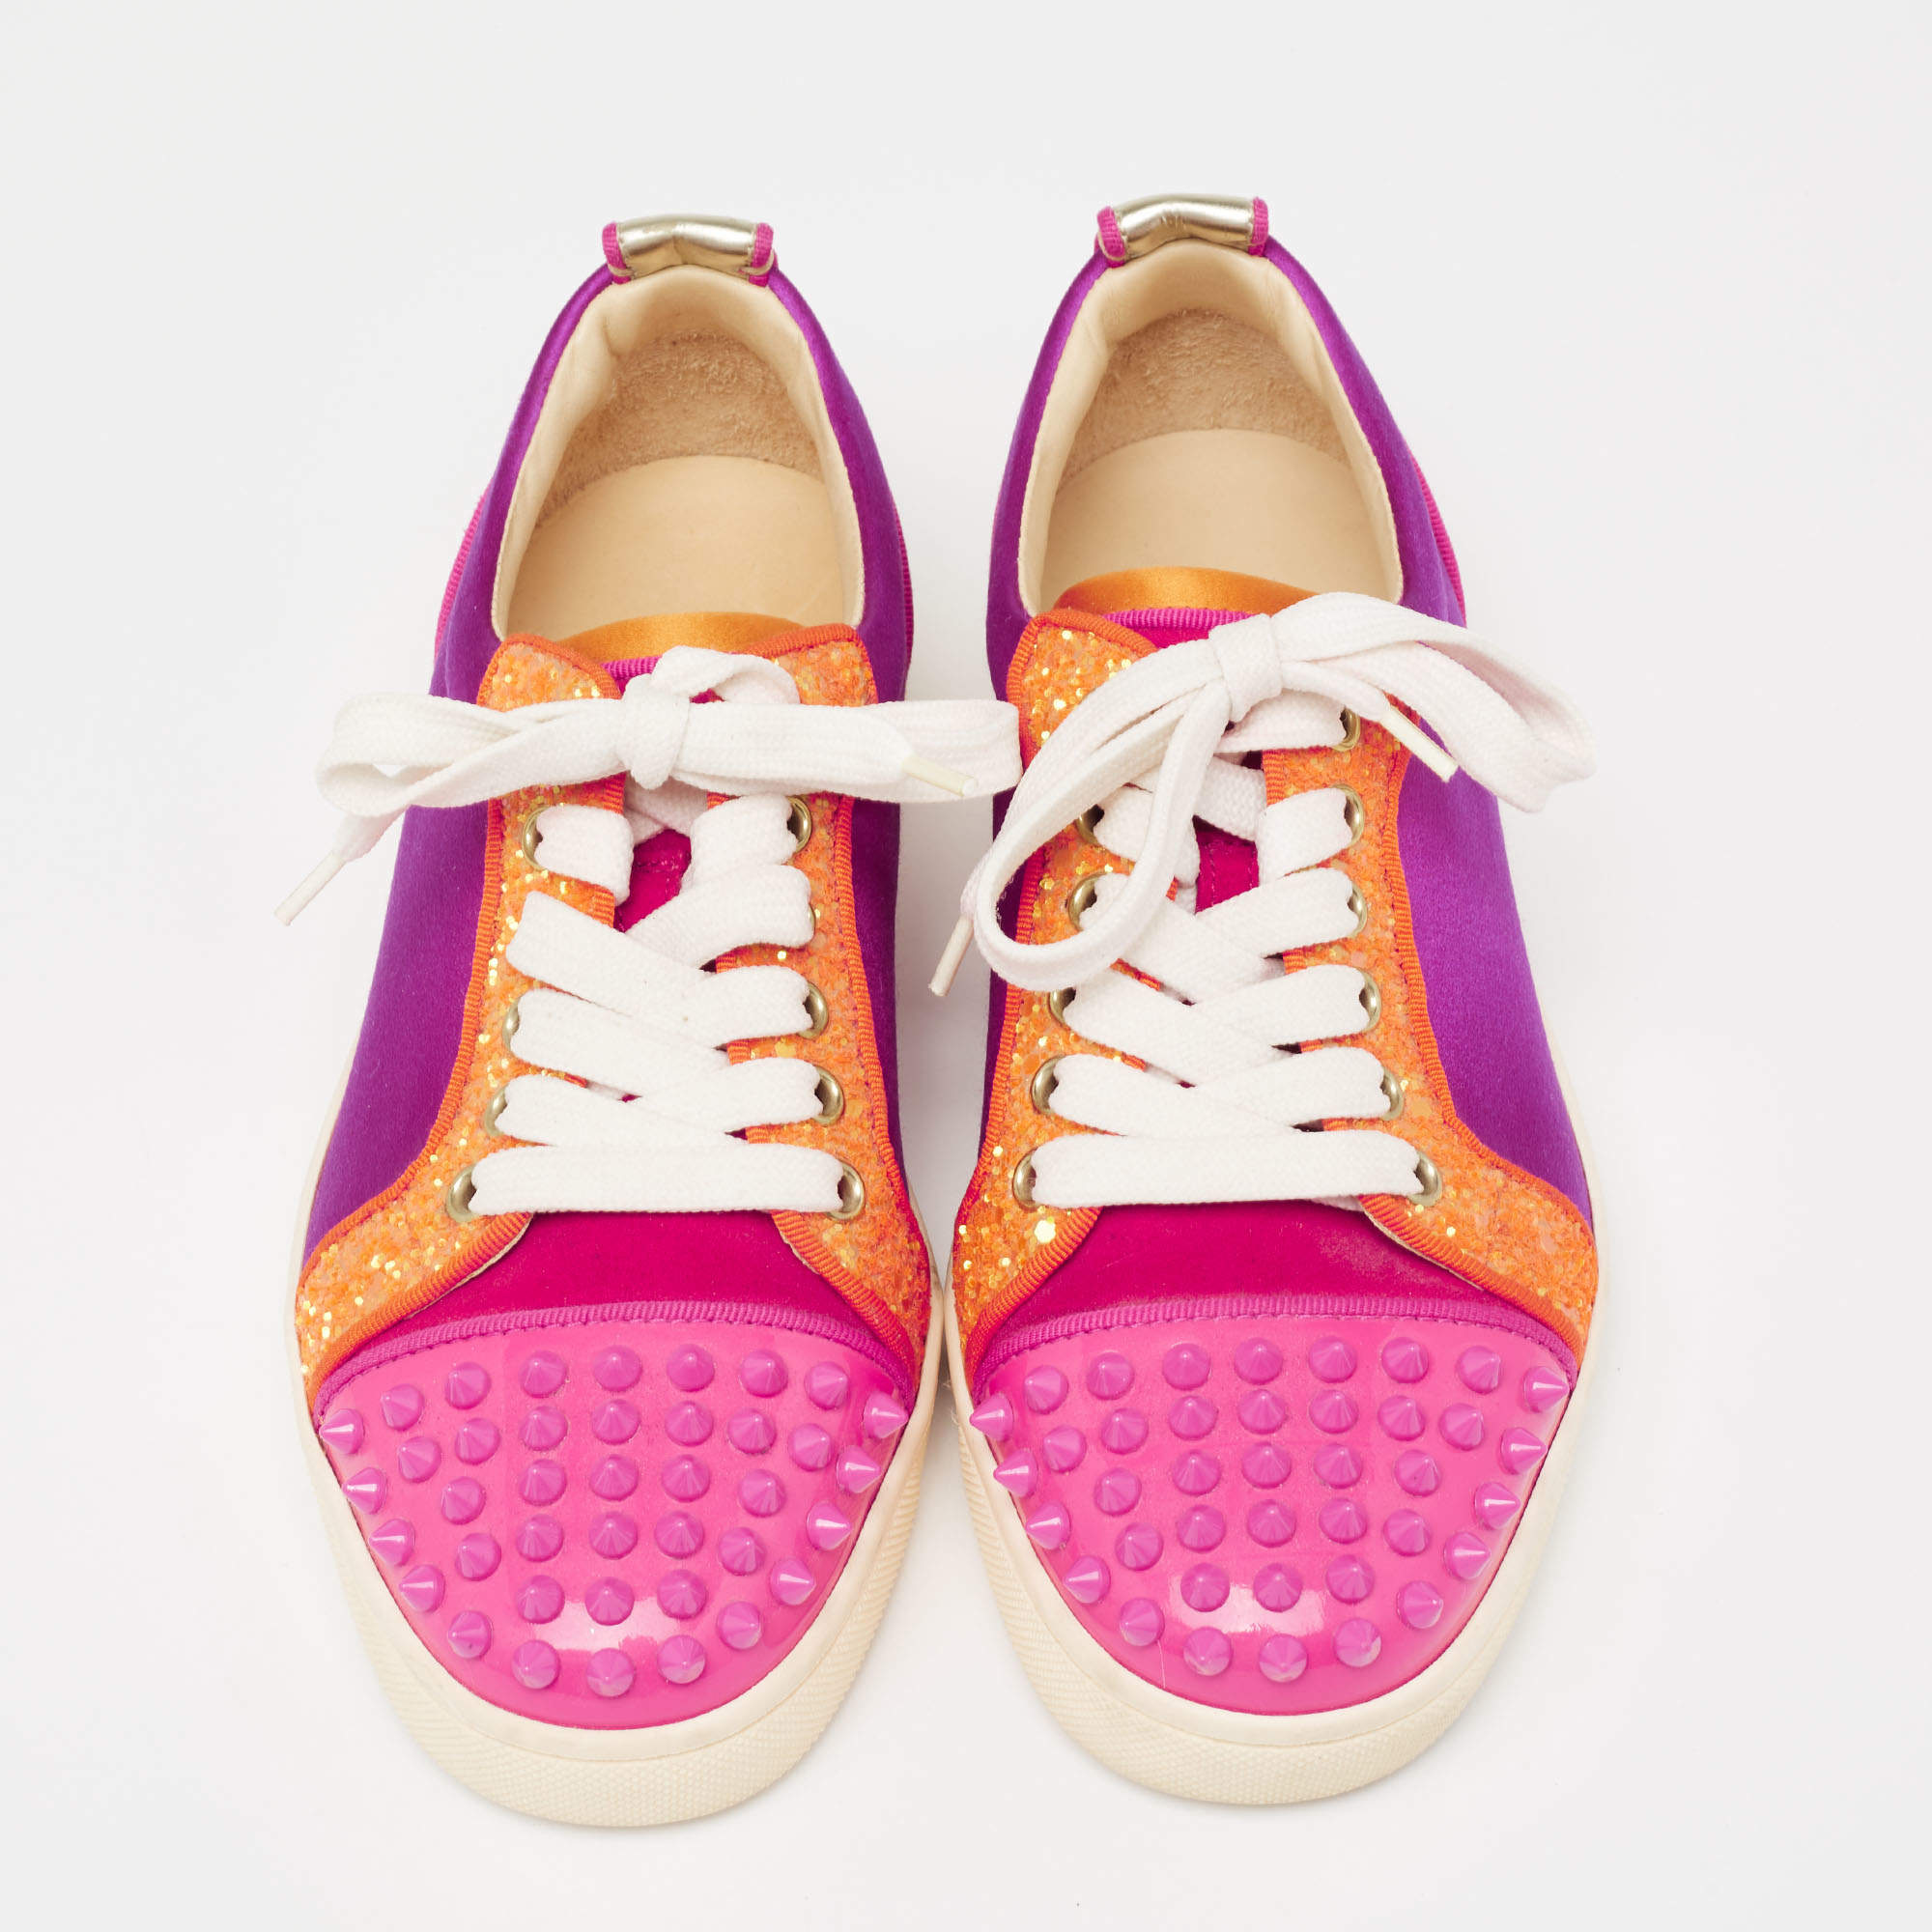 Christian Louboutin Multicolor Satin And Leather Suede Studded Low Top  Sneakers Size 36 Christian Louboutin